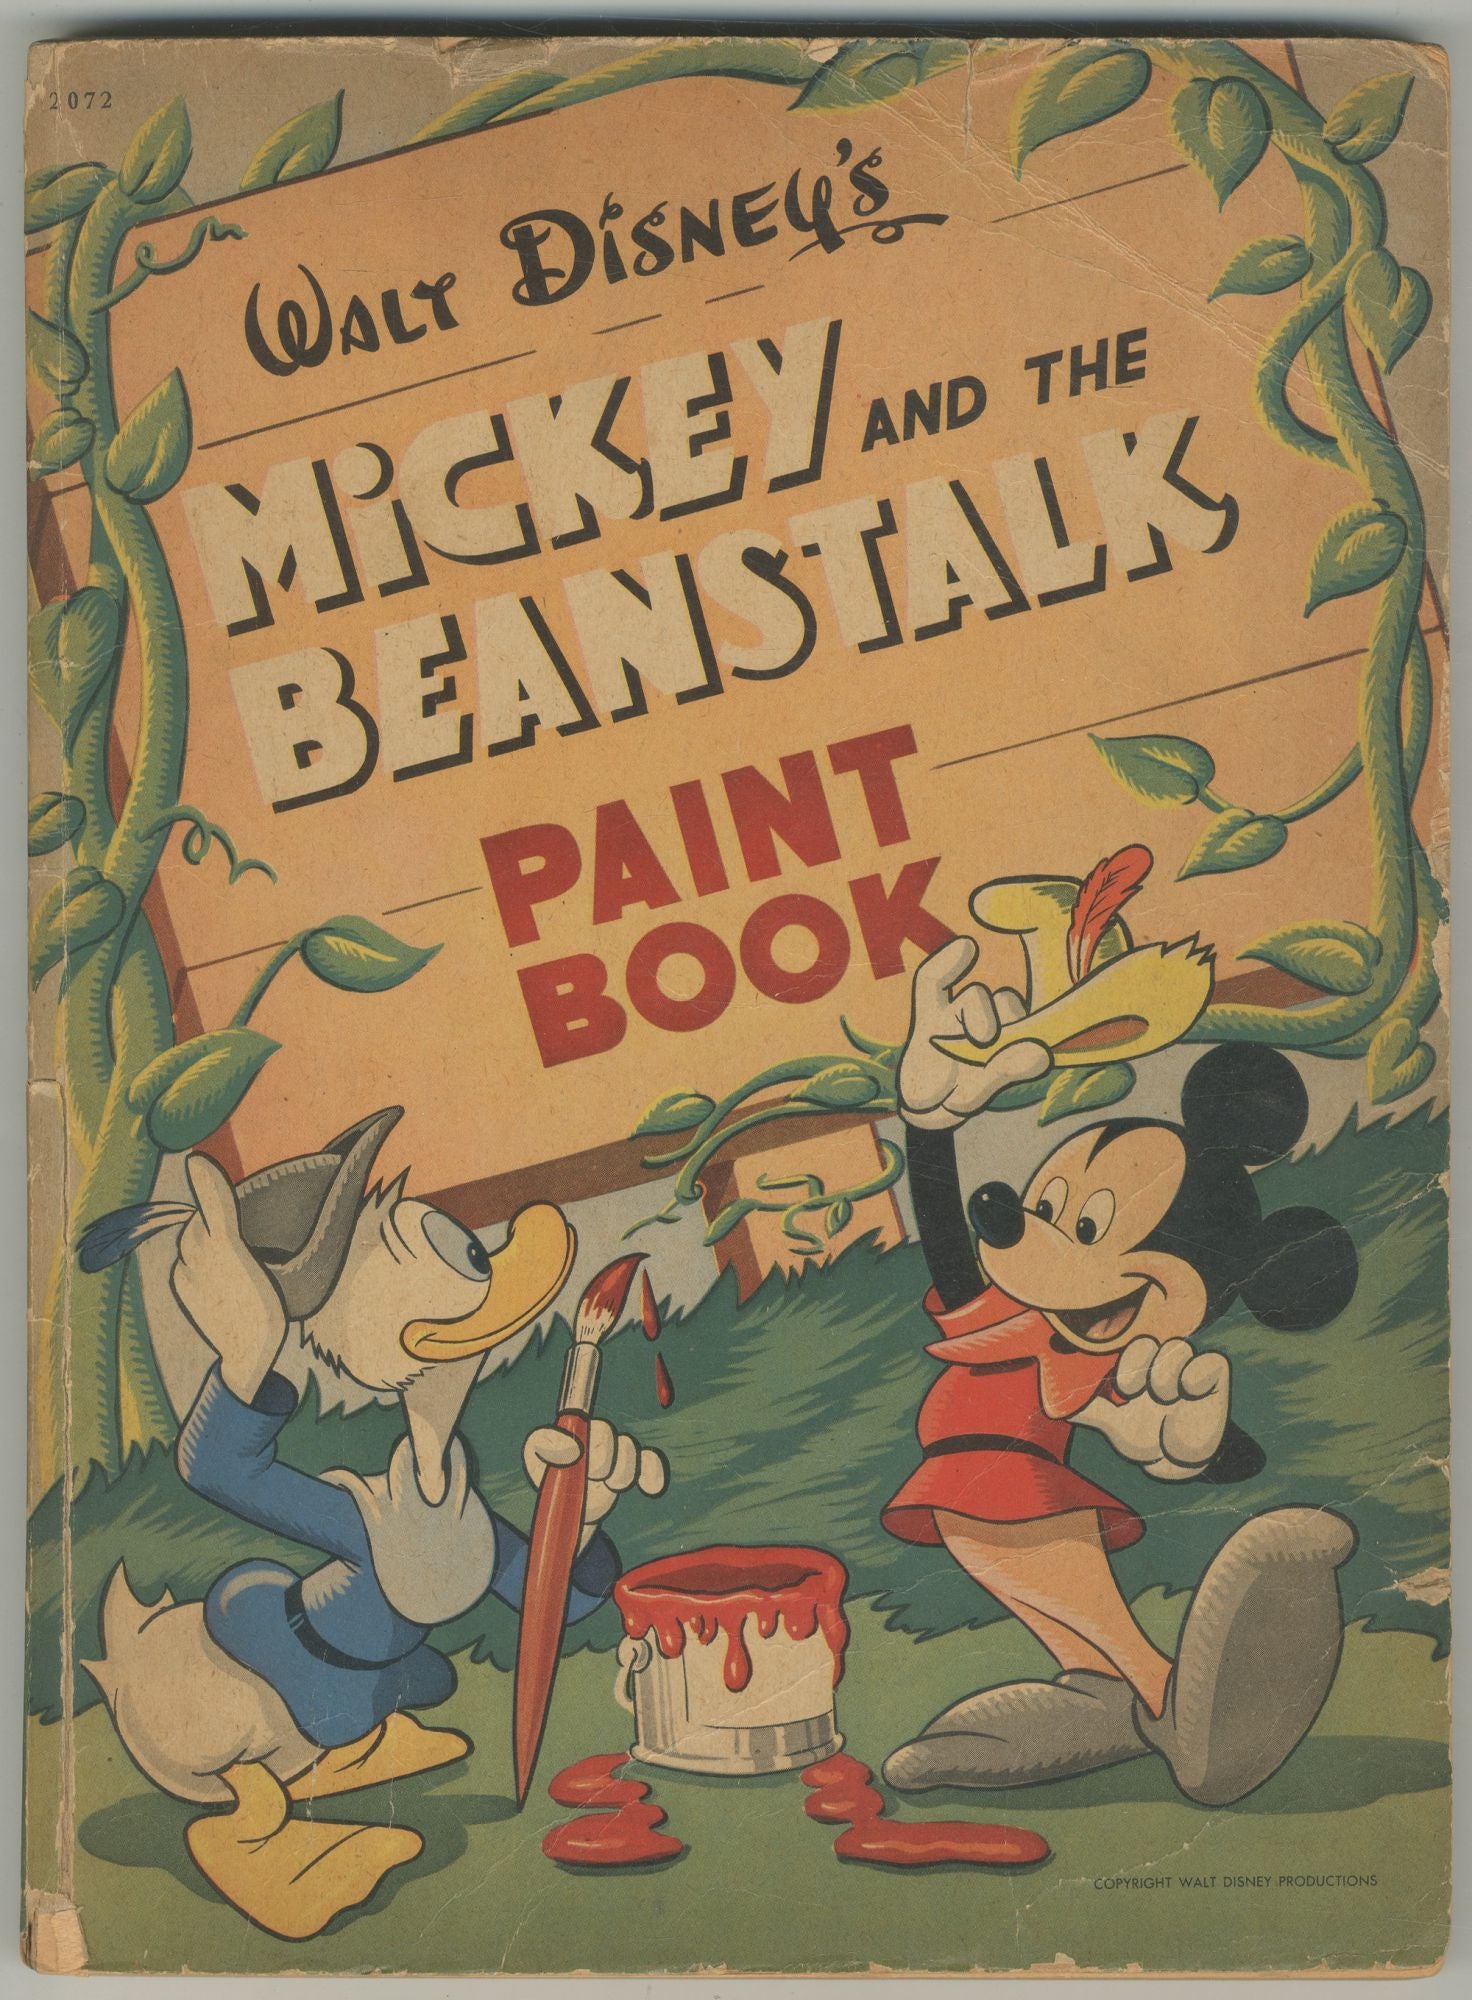 Walt Disney's Mickey and the Beanstalk Paint Book on Between the Covers